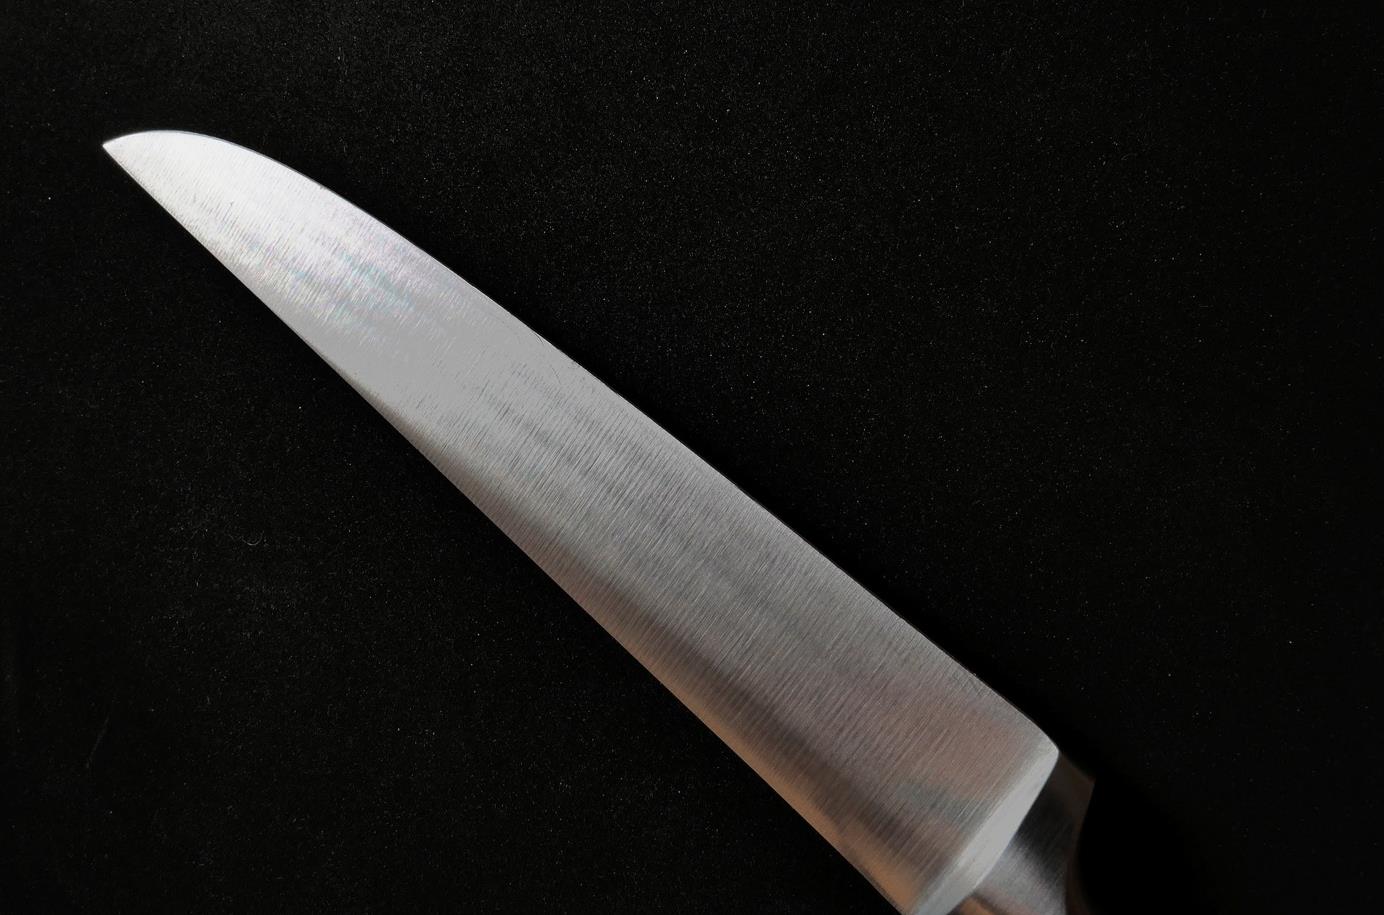 Cooking Essentials: How to Keep Your Kitchen Knife Sharp